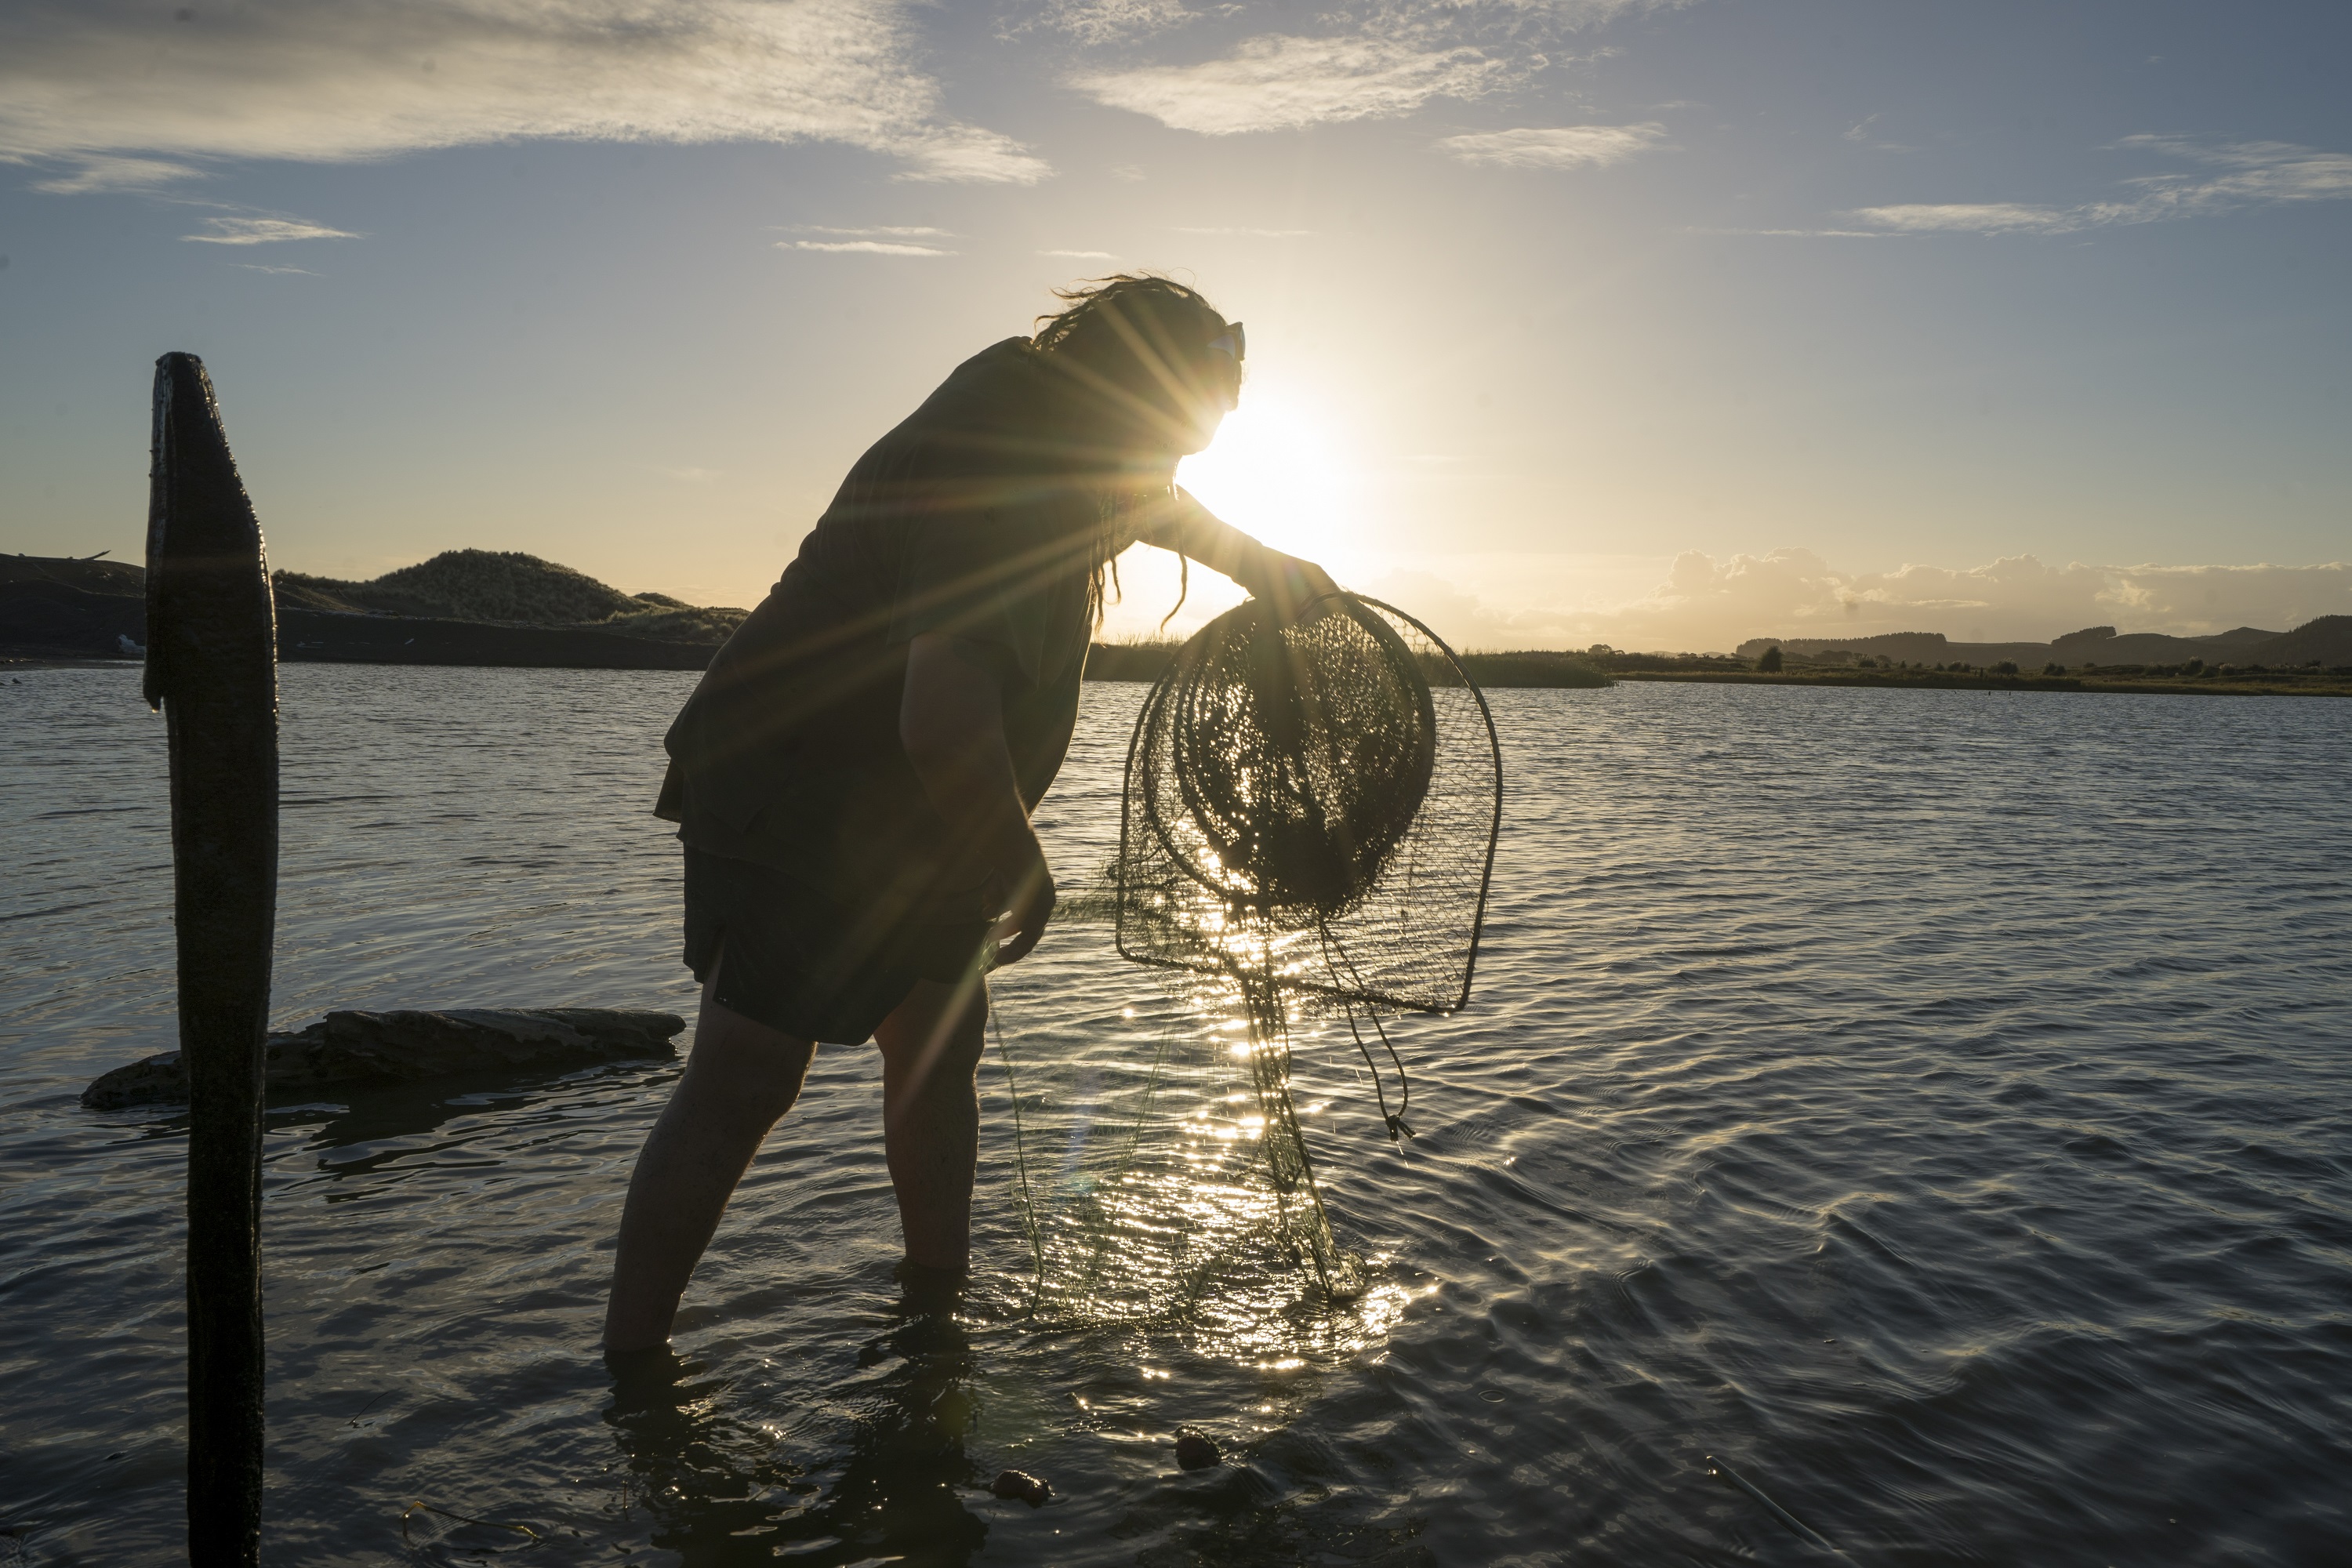 A person stands ankle-deep in water and lifts a fishing trap out of the water while the sun sets behind them.